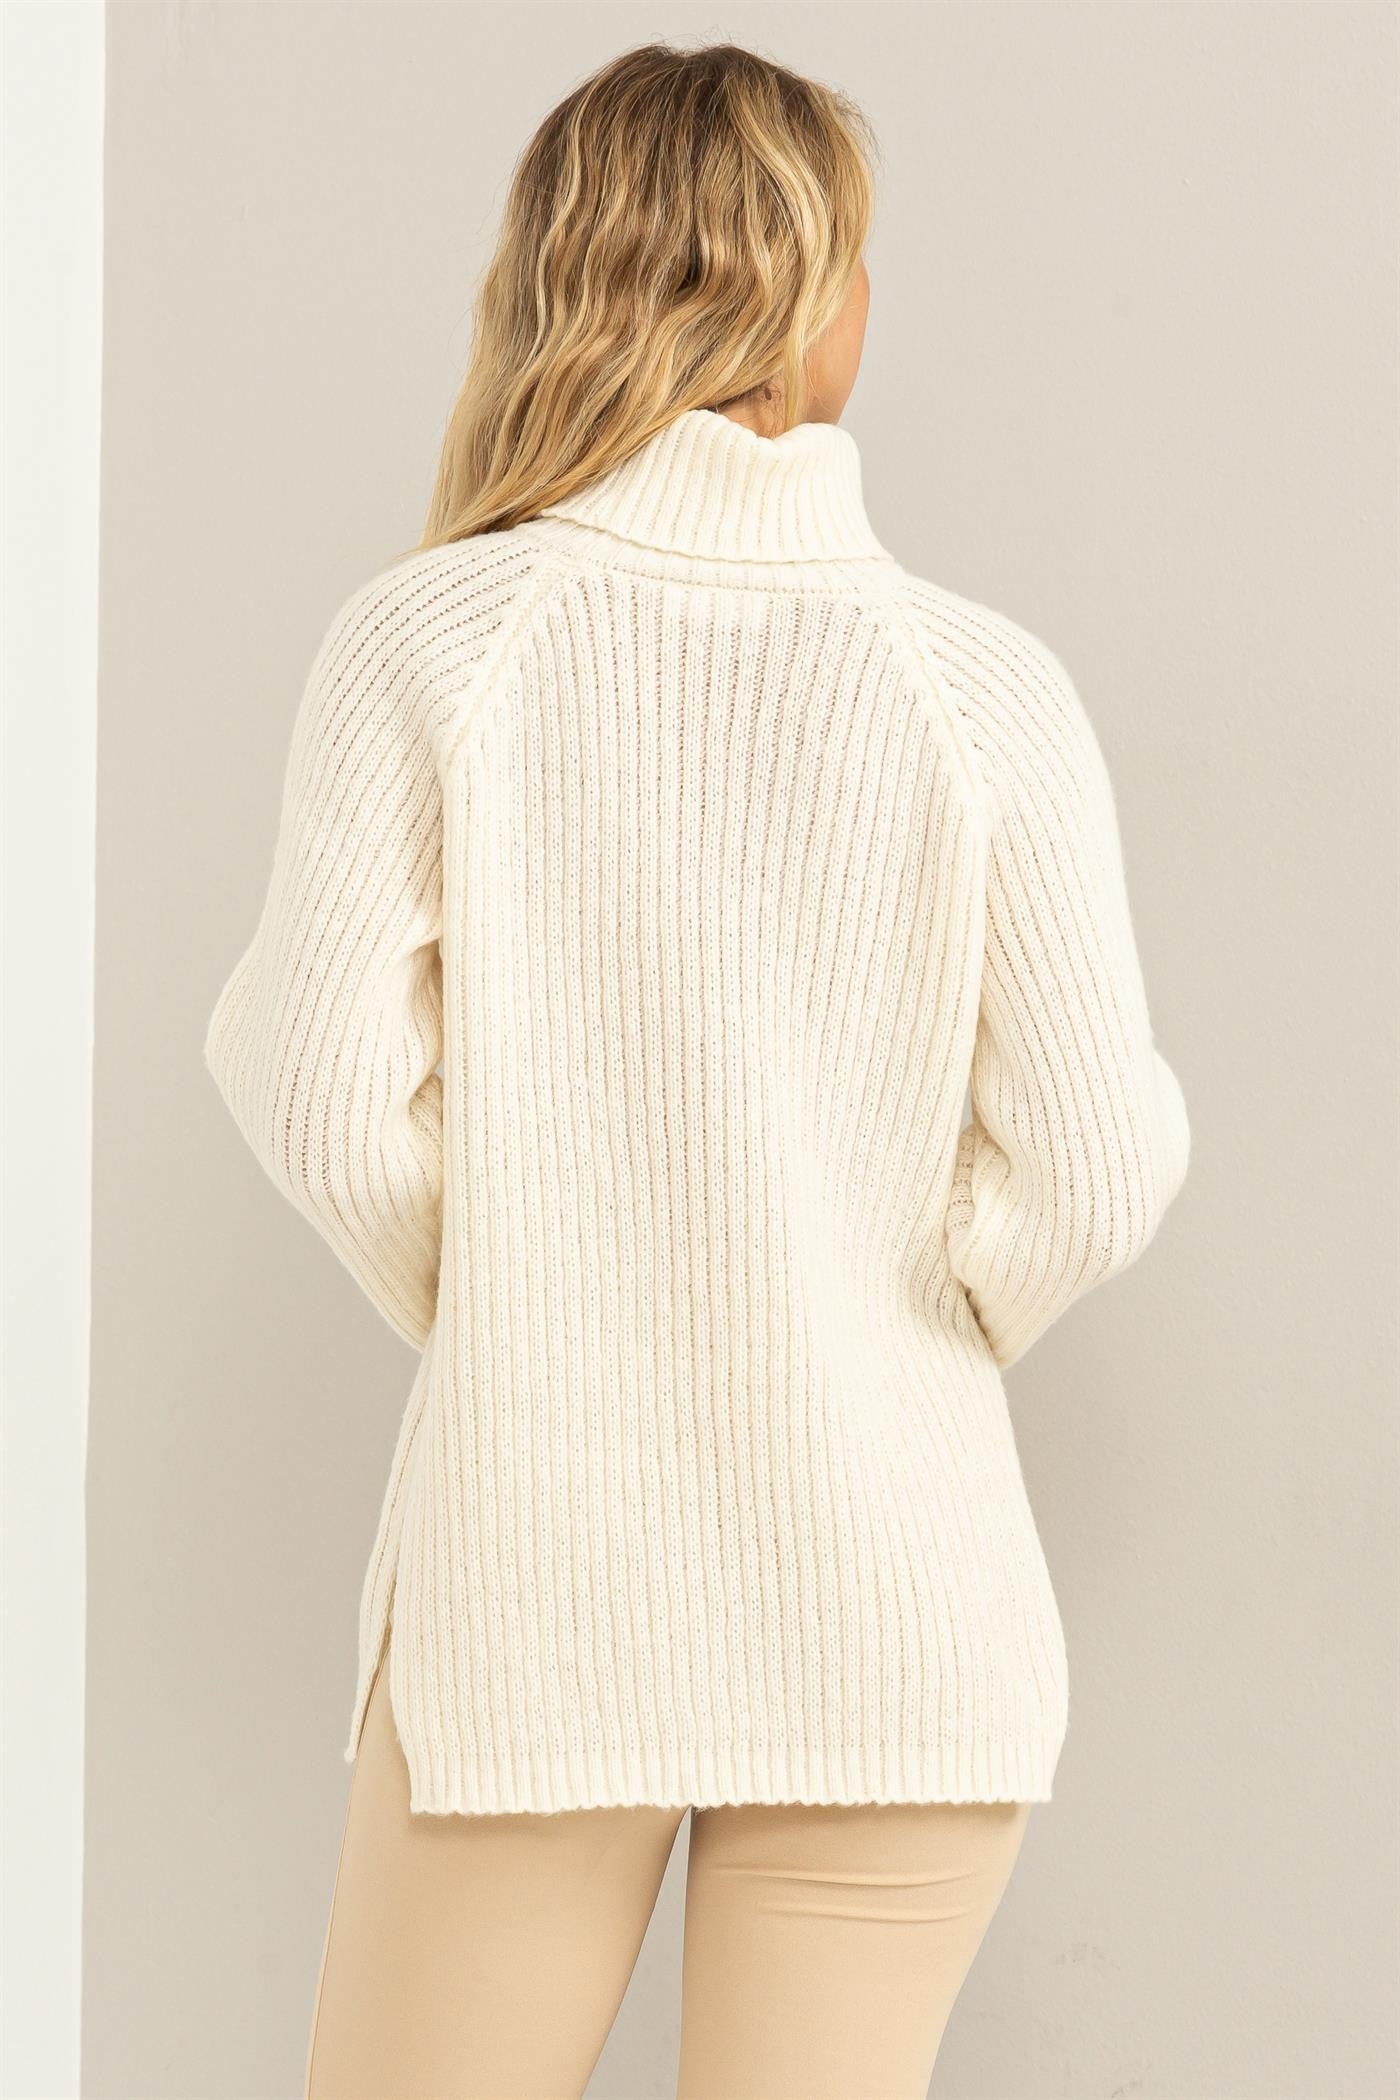 Ivy Sweater Top